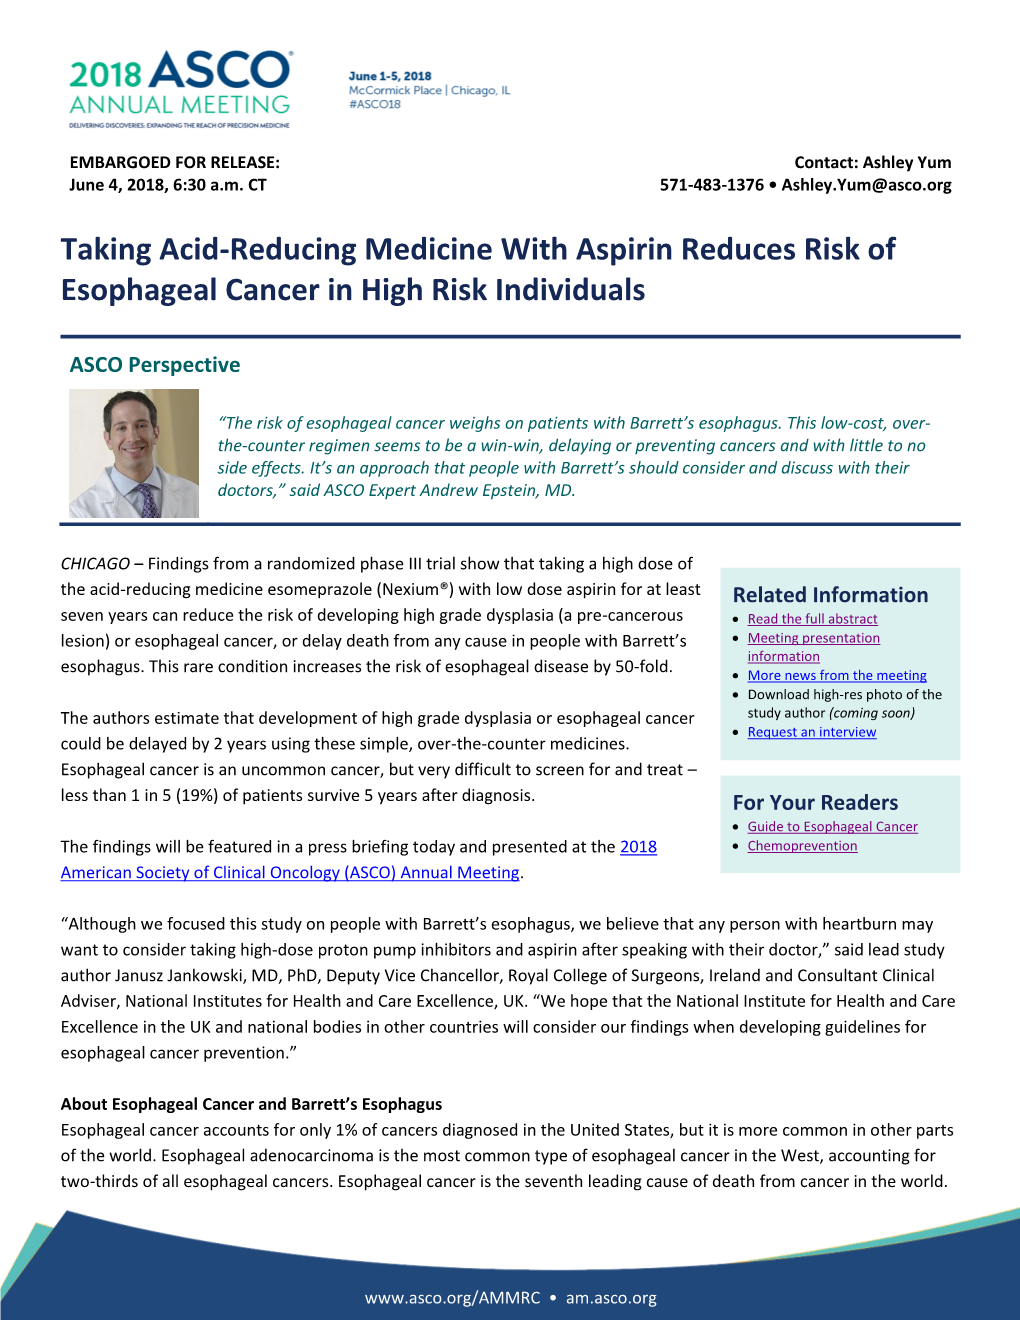 Taking Acid-Reducing Medicine with Aspirin Reduces Risk of Esophageal Cancer in High Risk Individuals